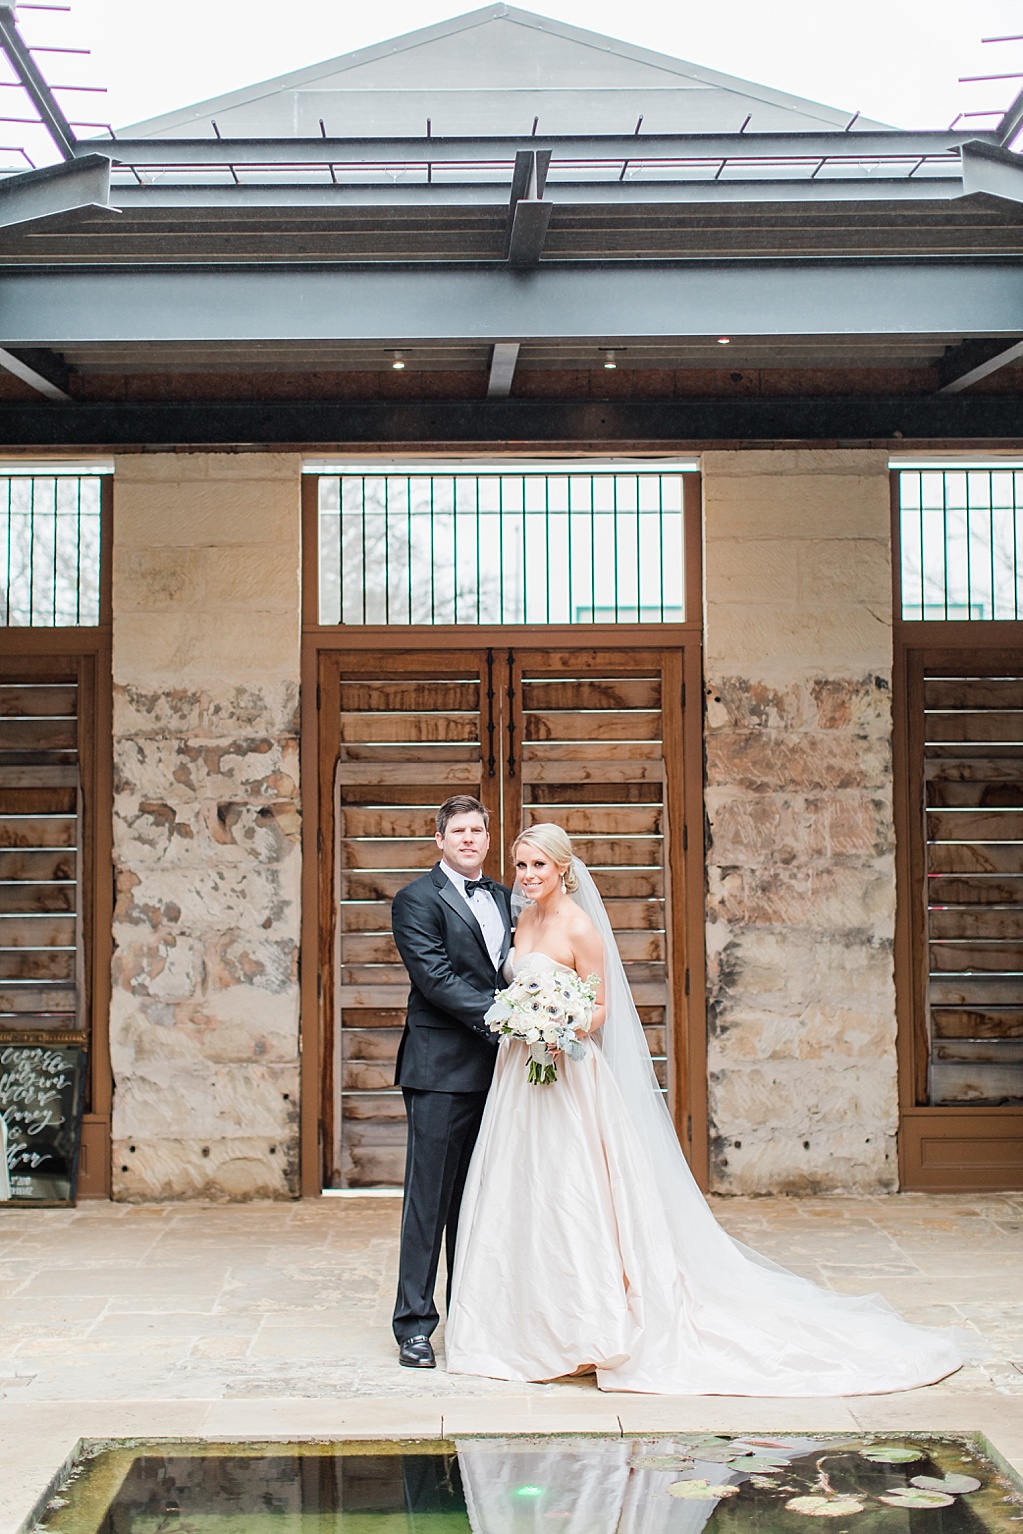 An Art Deco Black Tie Wedding at The Ingenhuett On High in Comfort Texas Featuring a Bentley Vintage Car and Blush Wedding Dress 0053